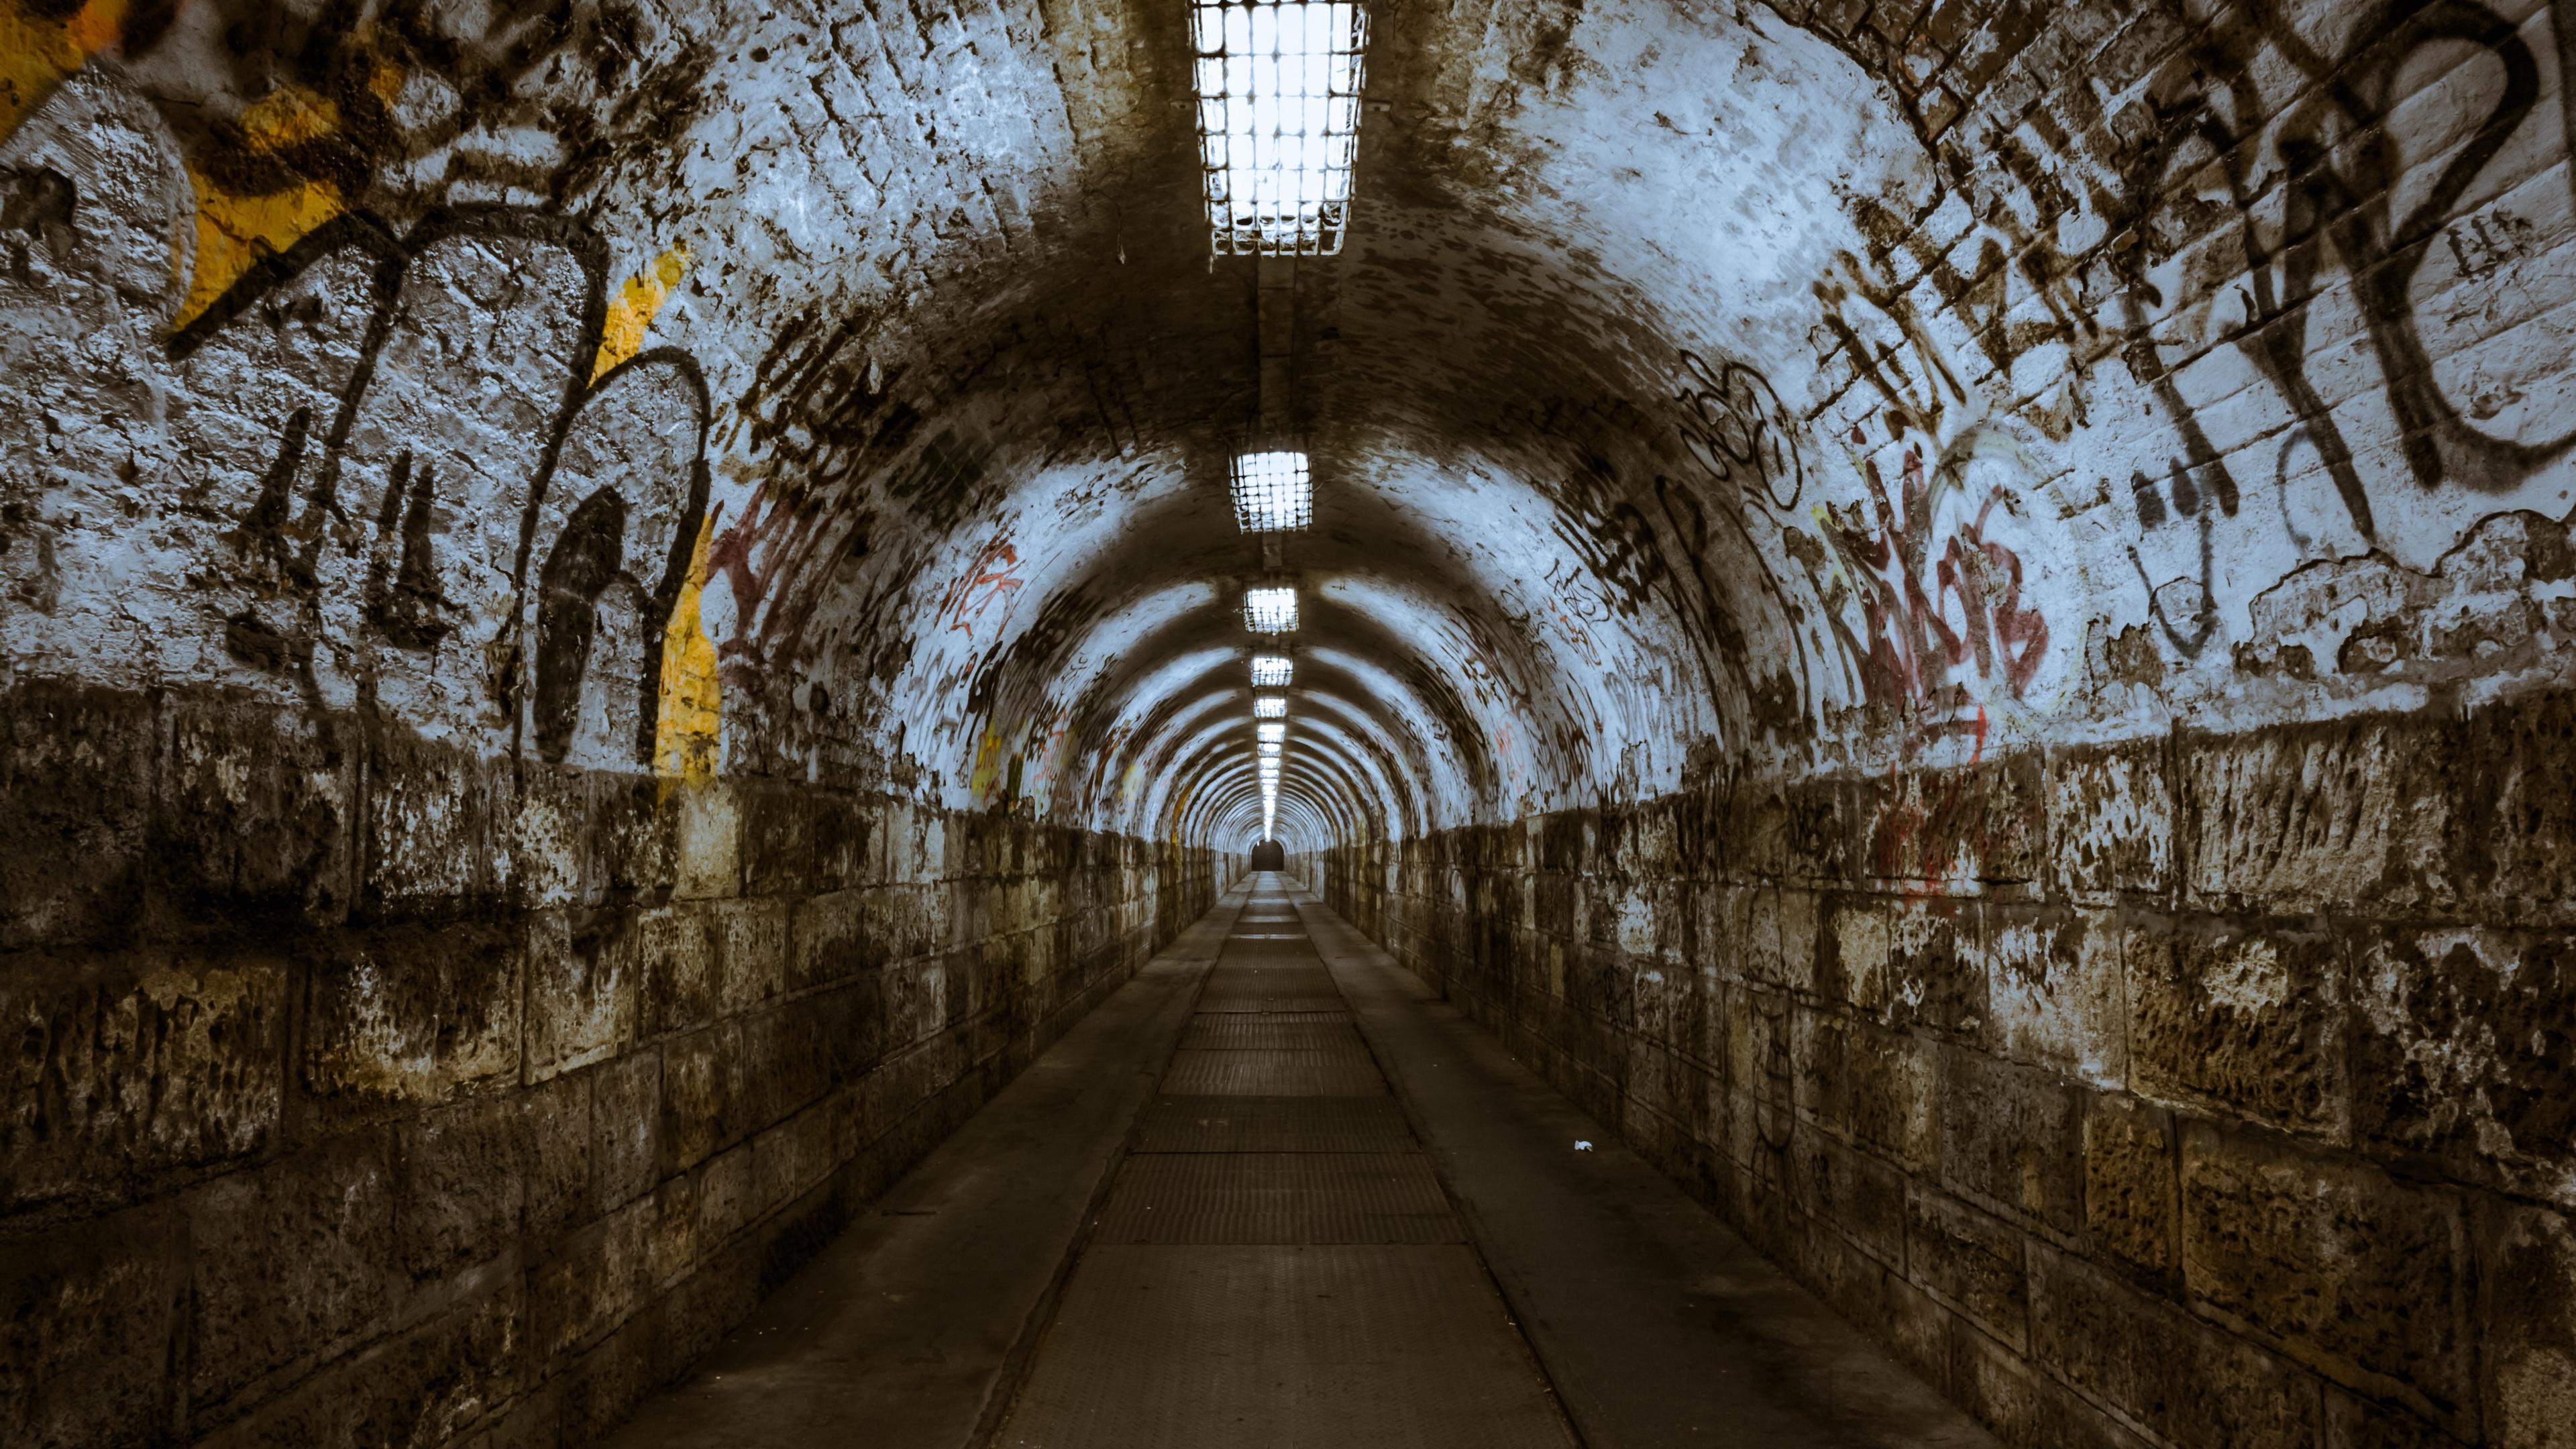 Download wallpaper 3840x2160 tunnel, underground, abandoned